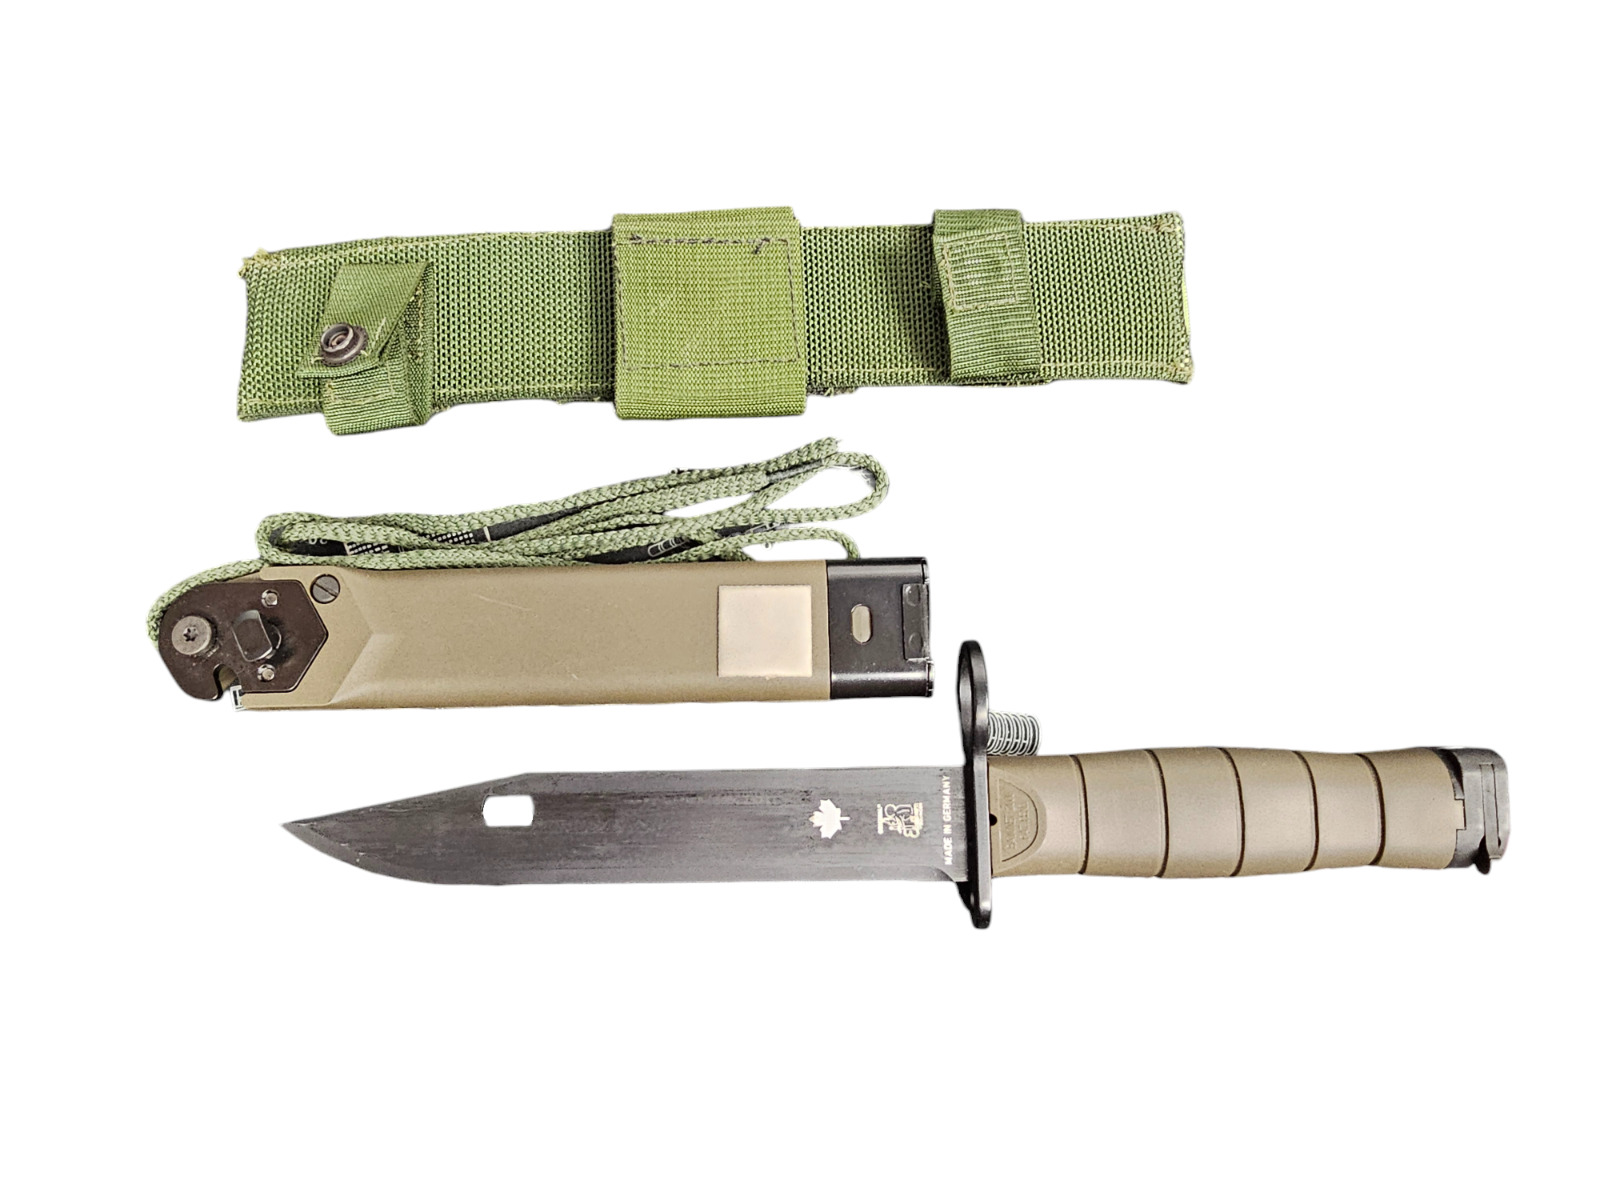 Canadian Armed Forces Bayonet 2000